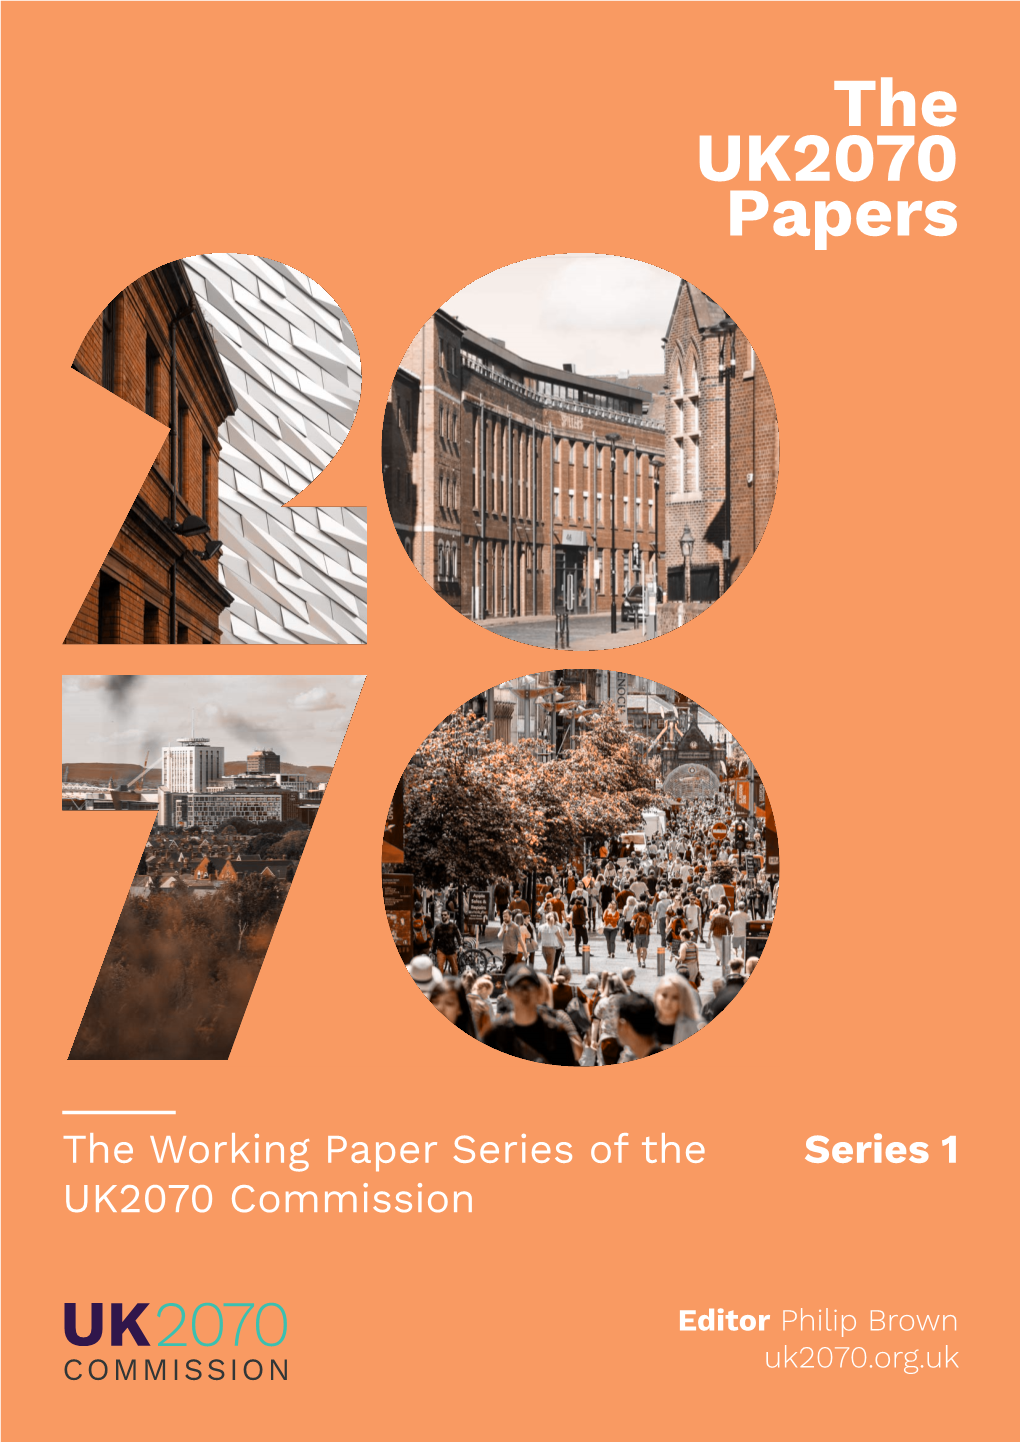 The UK2070 Papers